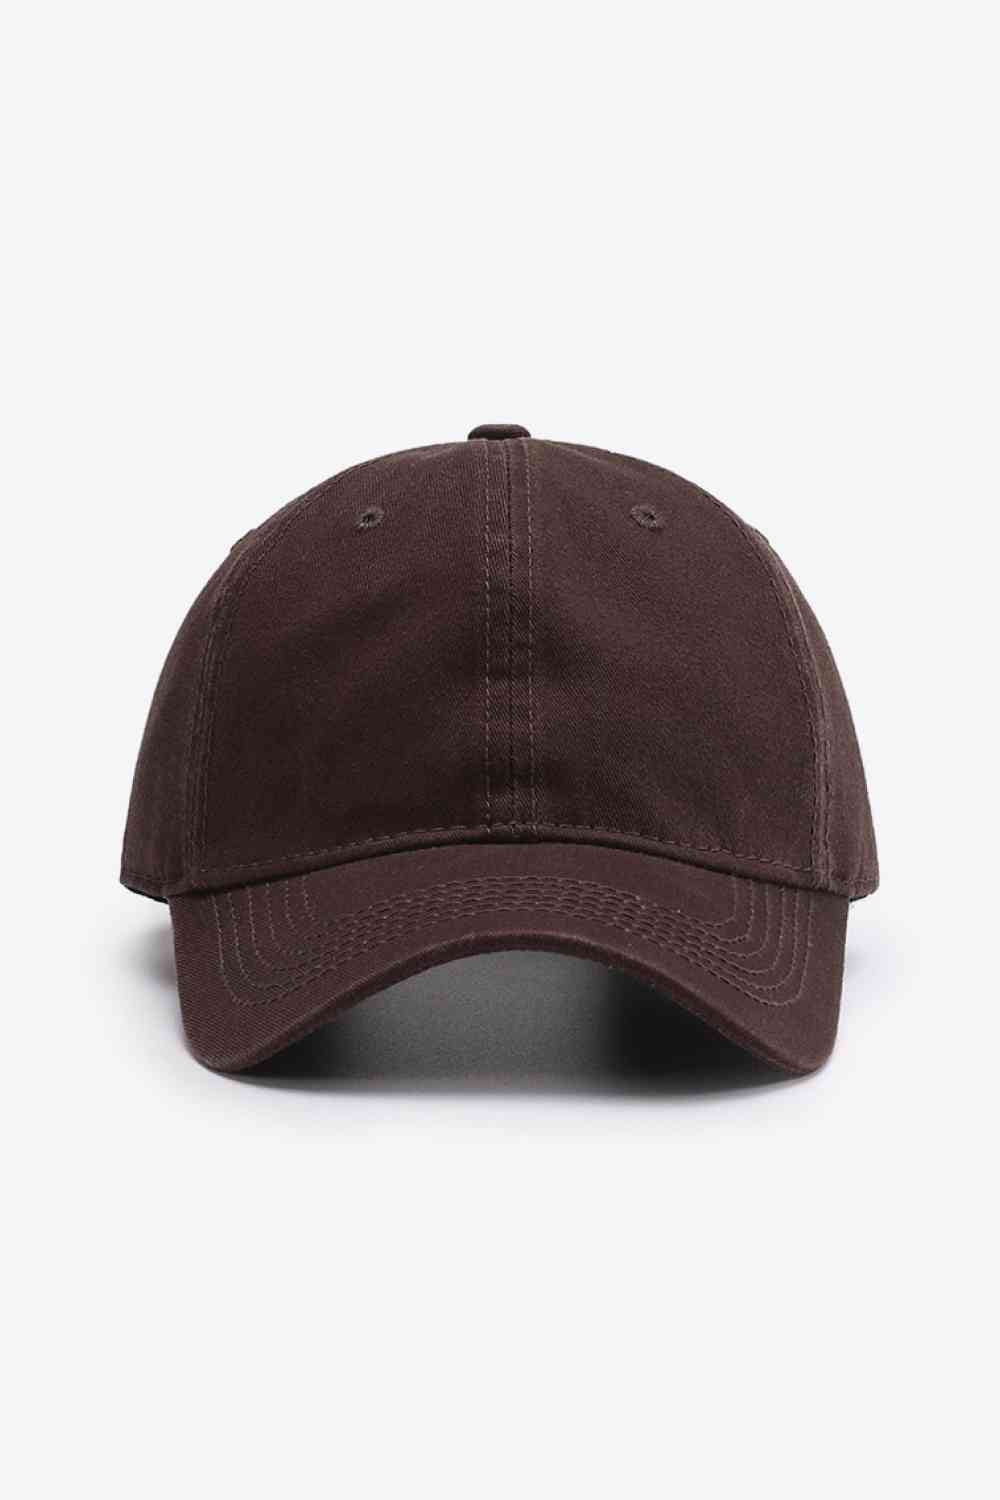 Cool and Classic Baseball Cap Brown One Size